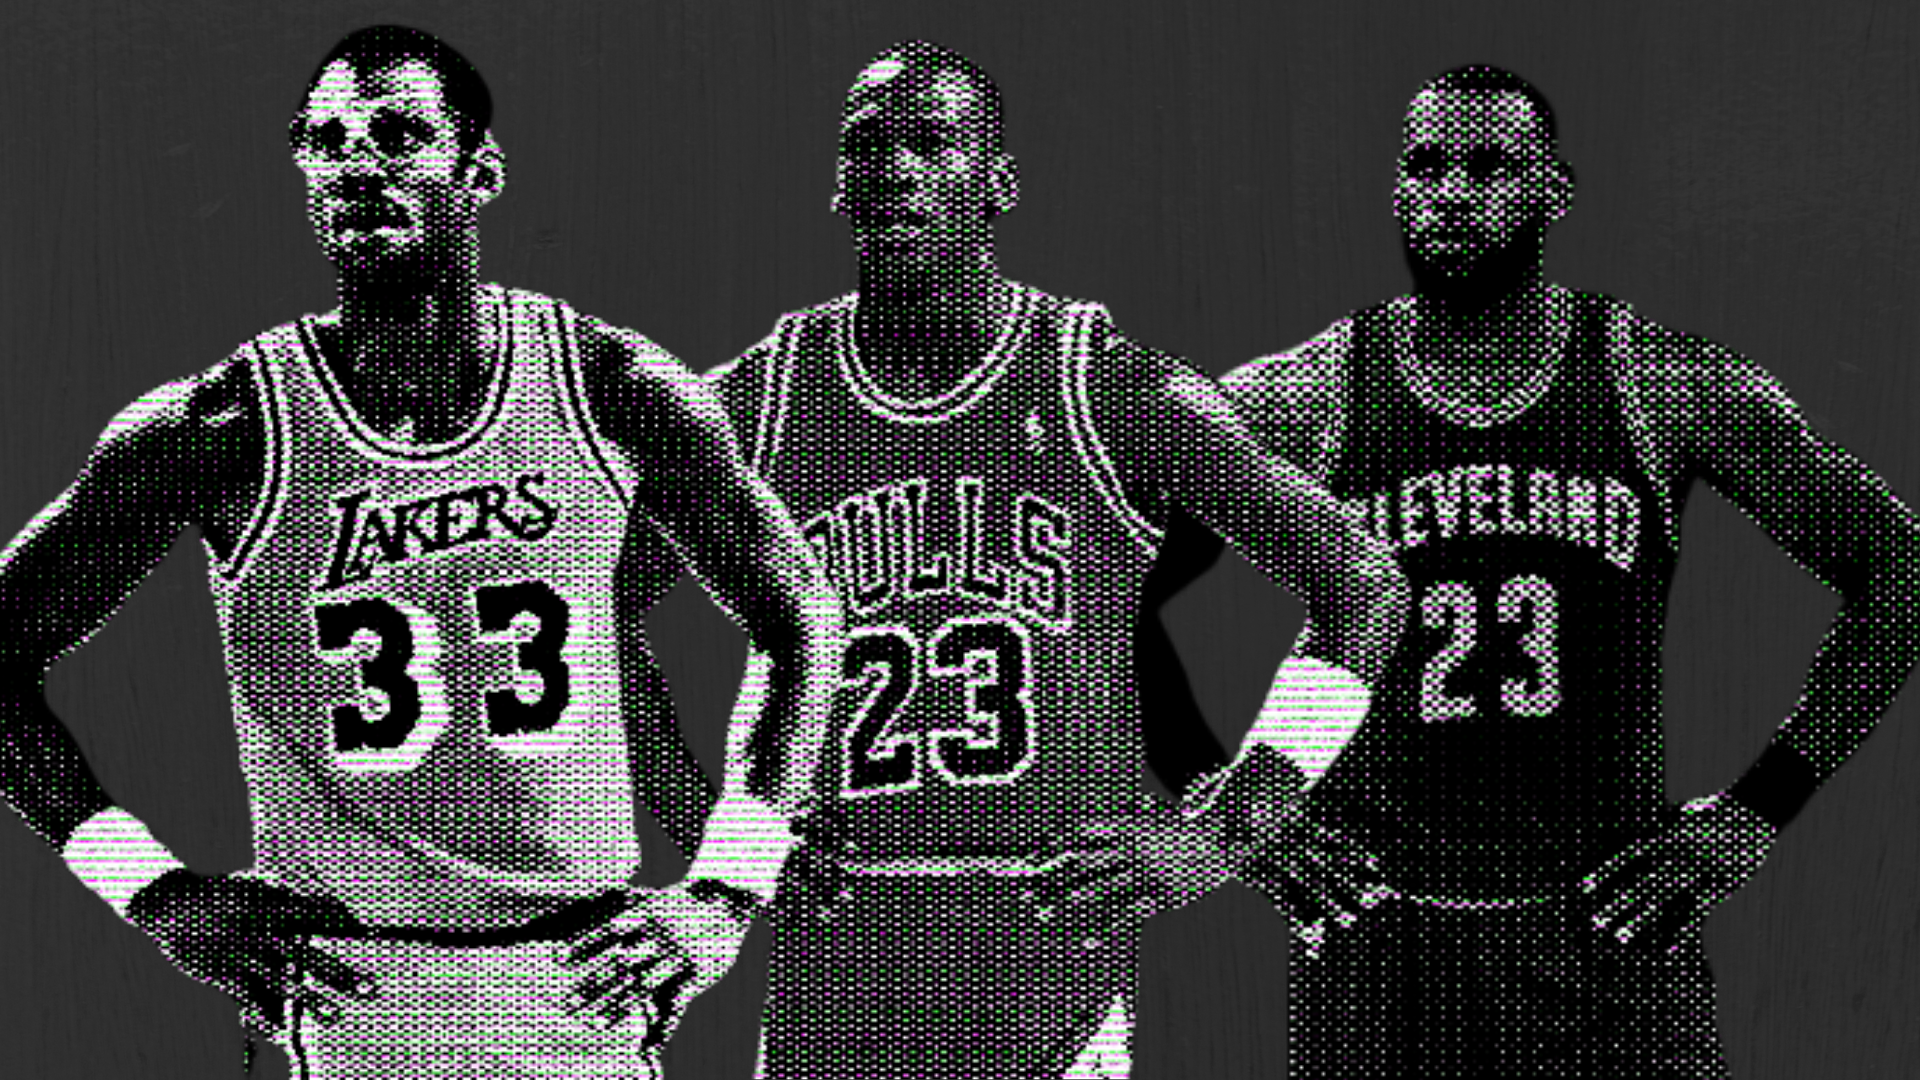 Determining the Most Valuable Player in NBA History